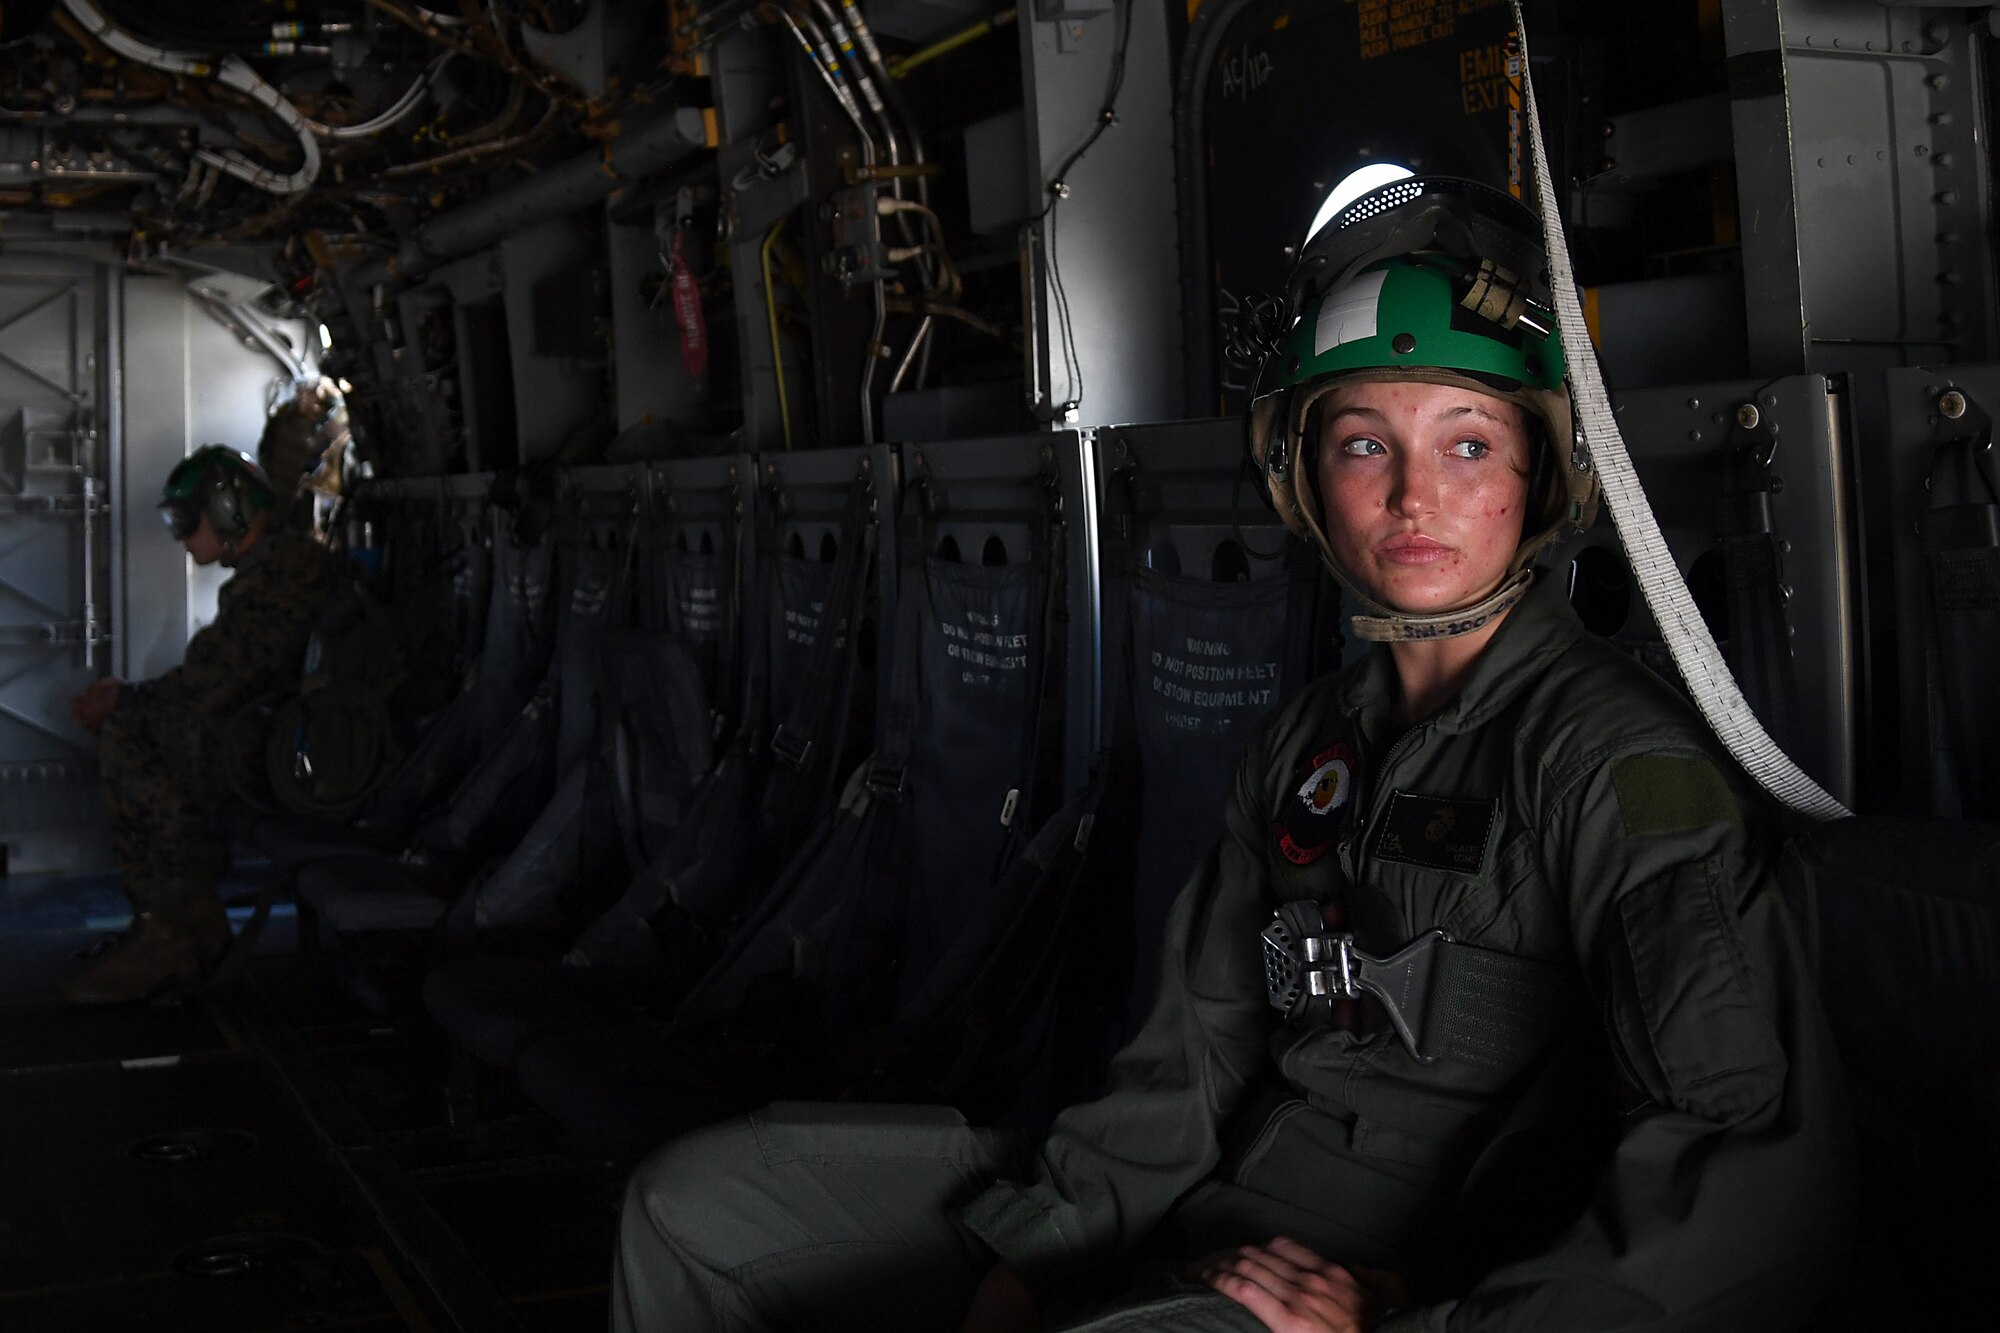 U.S. Marine Corps Lance Cpl. Porsha Delatte, Marine Medium Tiltrotor Squadron 774 avionics technician, Naval Air Station Norfolk, Virginia, sits inside an MV-22B Osprey at Keesler Air Force Base, Mississippi, Oct. 23, 2020. Marines came to Keesler to conduct routine training operations in and around the Mississippi area. (U.S. Air Force photo by Senior Airman Suzie Plotnikov)